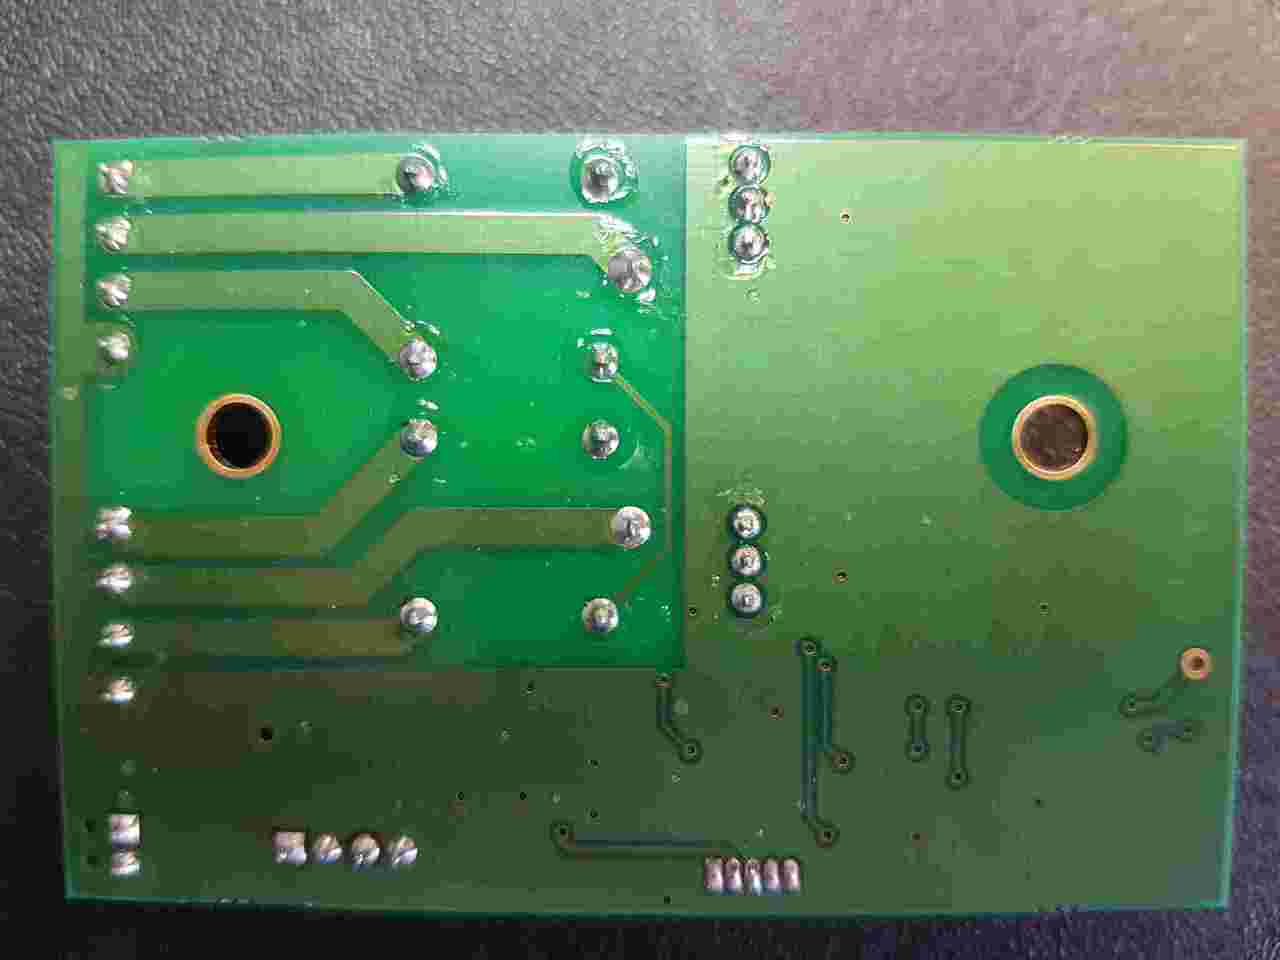 The Contact Delay PCB ignores each alarm signal until the pre-set delay time has elapsed.  The appropriate alarm output is then activated and is only de-activated when the alarm condition ends.
The delay times are individually set for each alarm signal using two rotary, hexadecimal switches (S1/S2), with switch positions configured and marked on the PCB in the following increments:
•	0s, 5s, 10s, 15s, 20s, 30s, 40s, 50s, 60s, 1½mins, 2mins, 2½mins, 3mins, 4mins, 5mins, 6mins.

